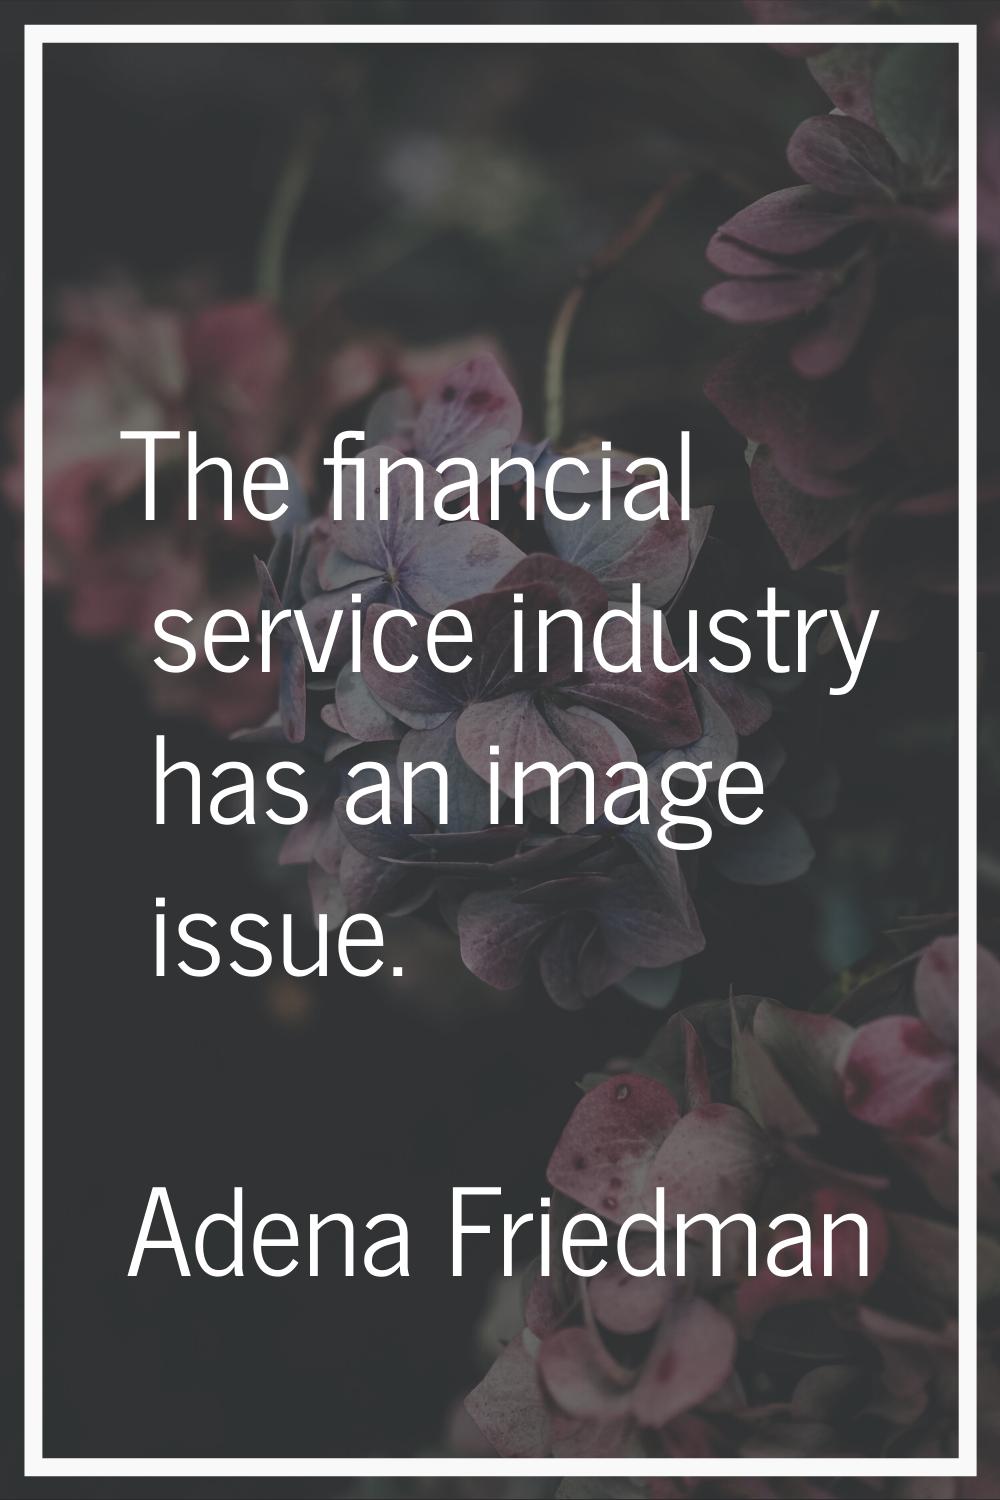 The financial service industry has an image issue.